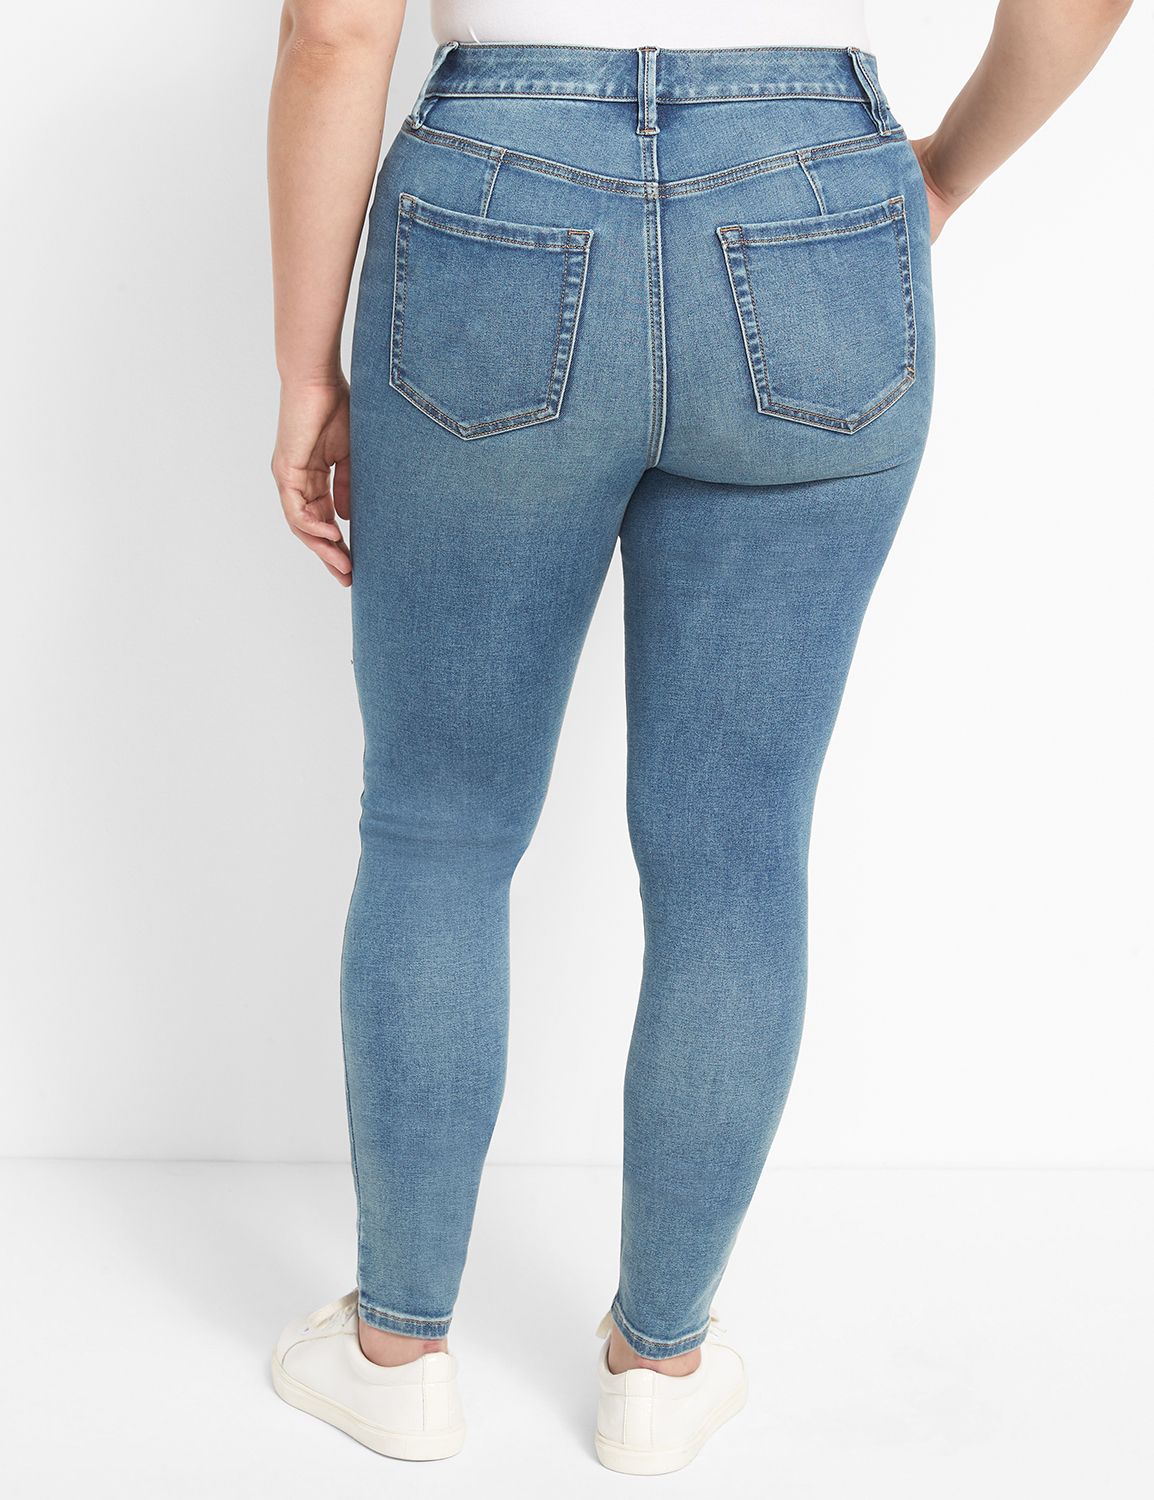 Lane Bryant Plus Magic Waistband Deluxe Fit Low Rise Skinny Denim Jeans  Size 14 Blue - $23 - From Jen